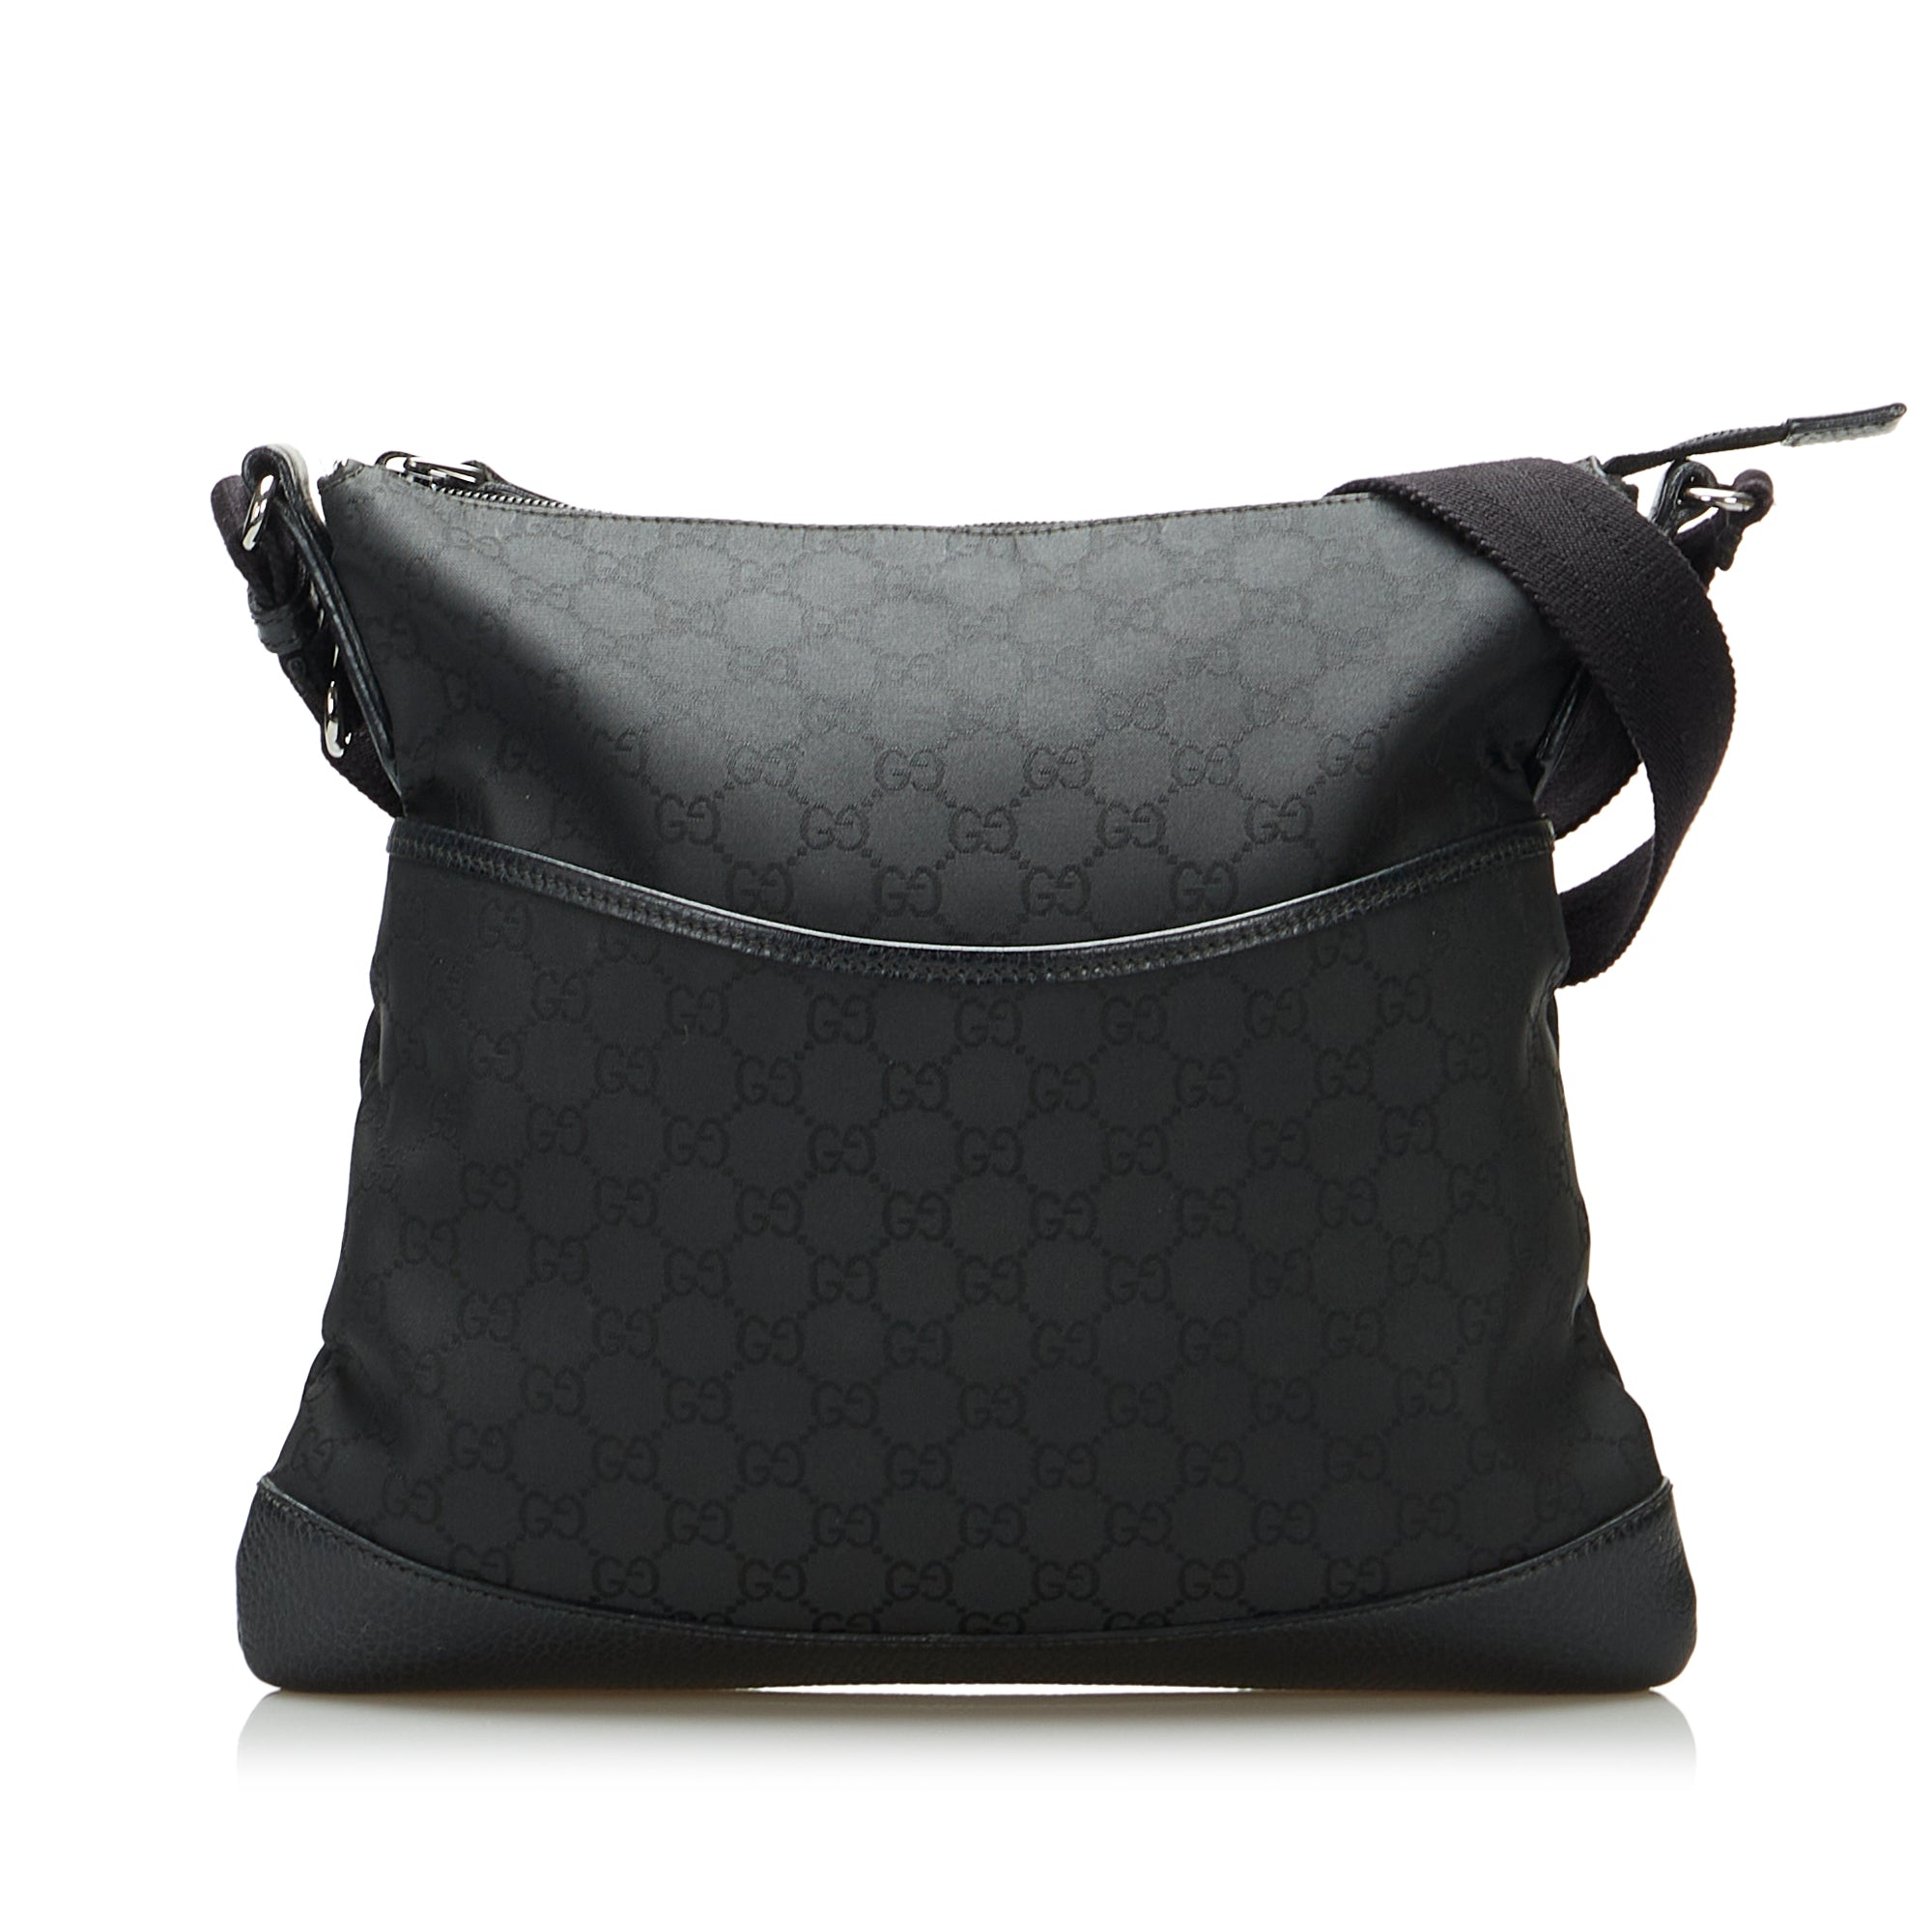 Gucci Black GG Canvas and Leather Crossbody Bag Gucci